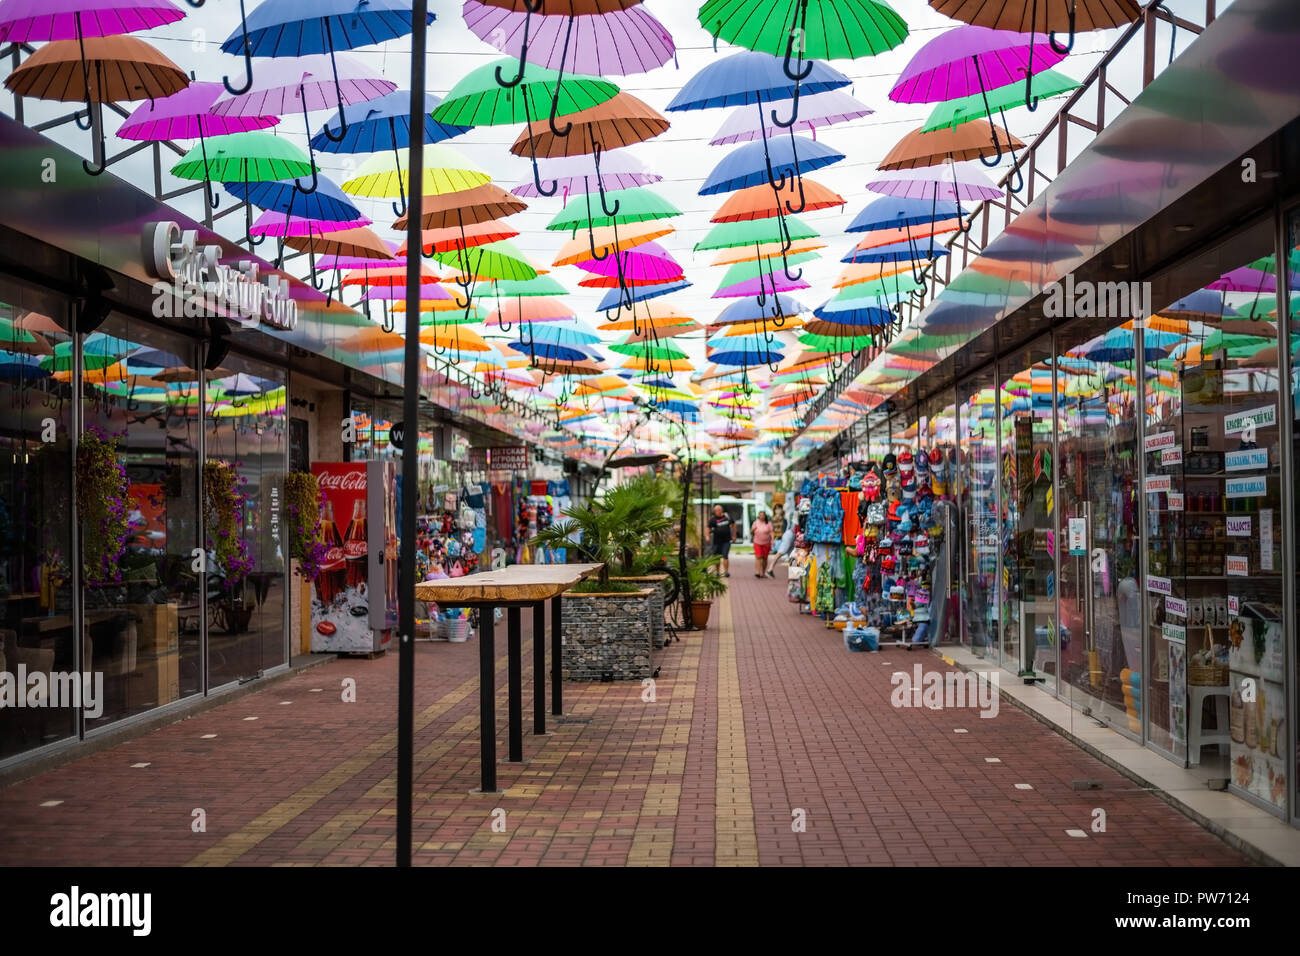 ADLER, RUSSIA - SEPTEMBER, 2018: alley soaring Umbrellas in Sochi. This location is popular with tourists. Stock Photo